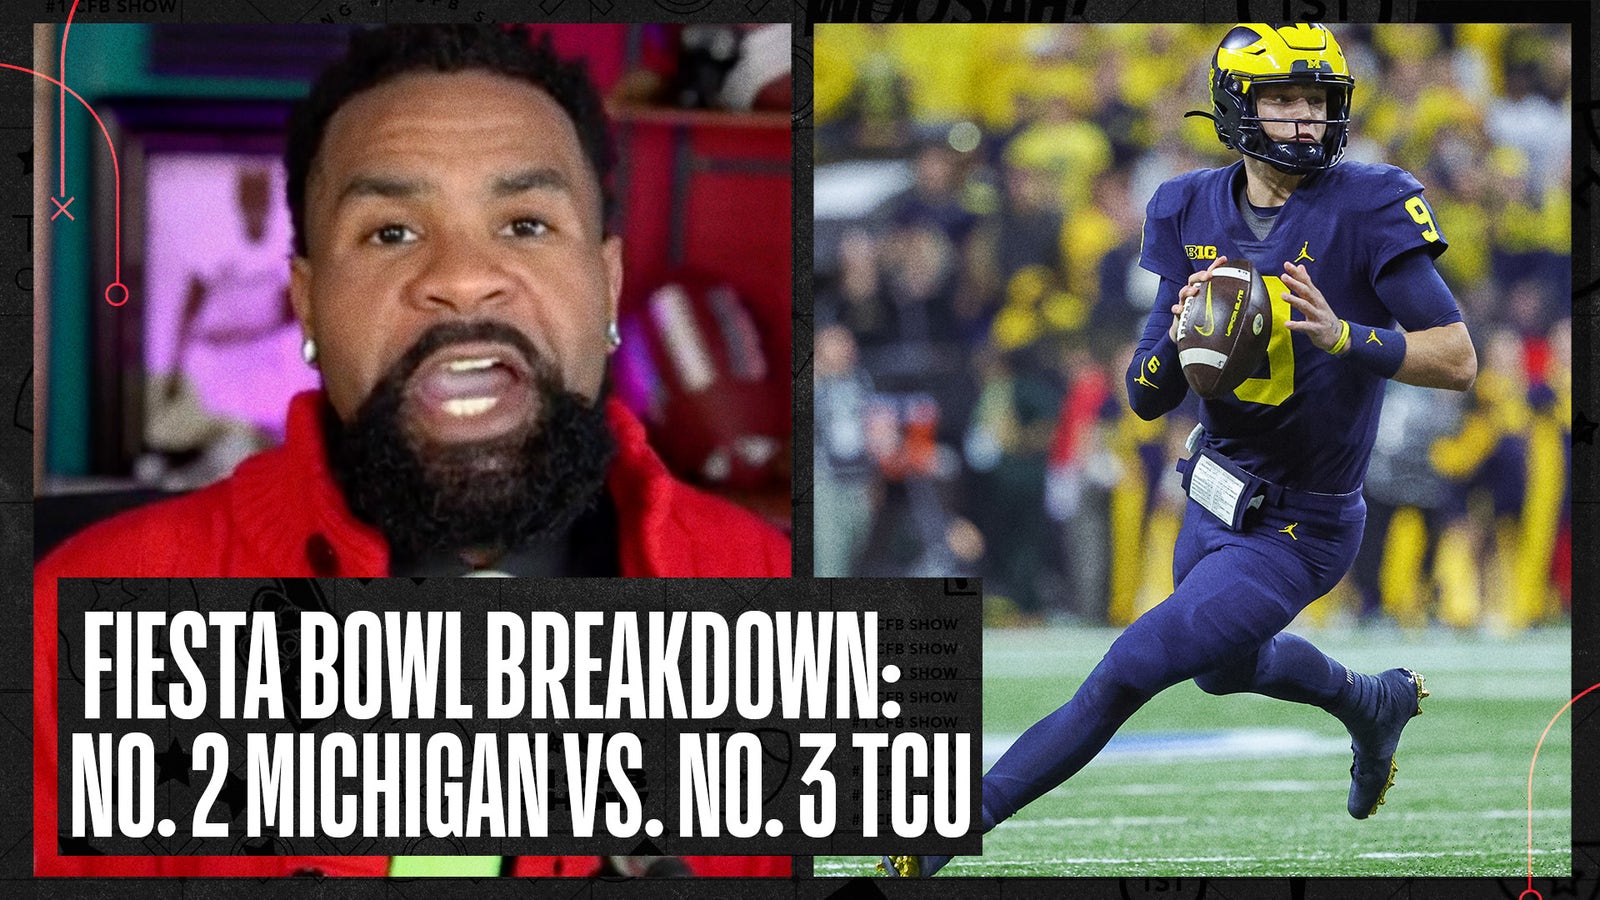 What's at stake for Michigan, TCU?